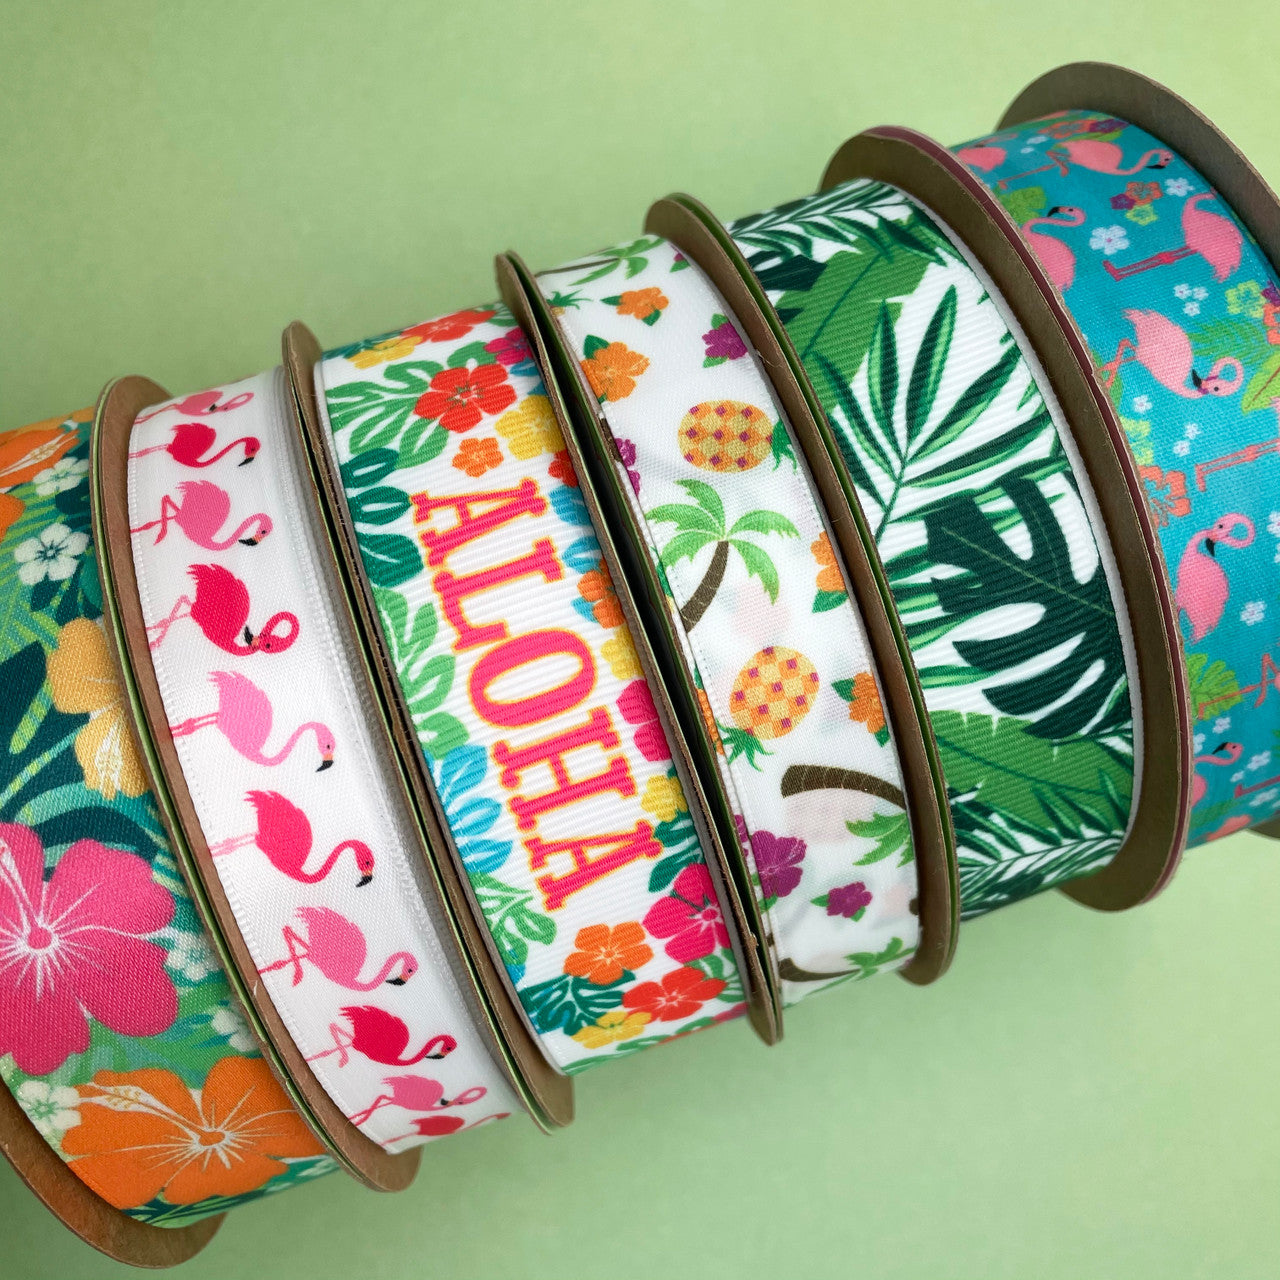 Mix and match our Aloha ribbon with flamingos, tropical flowers, palm fronds and turquoise flamingos to complete your tropical party theme!